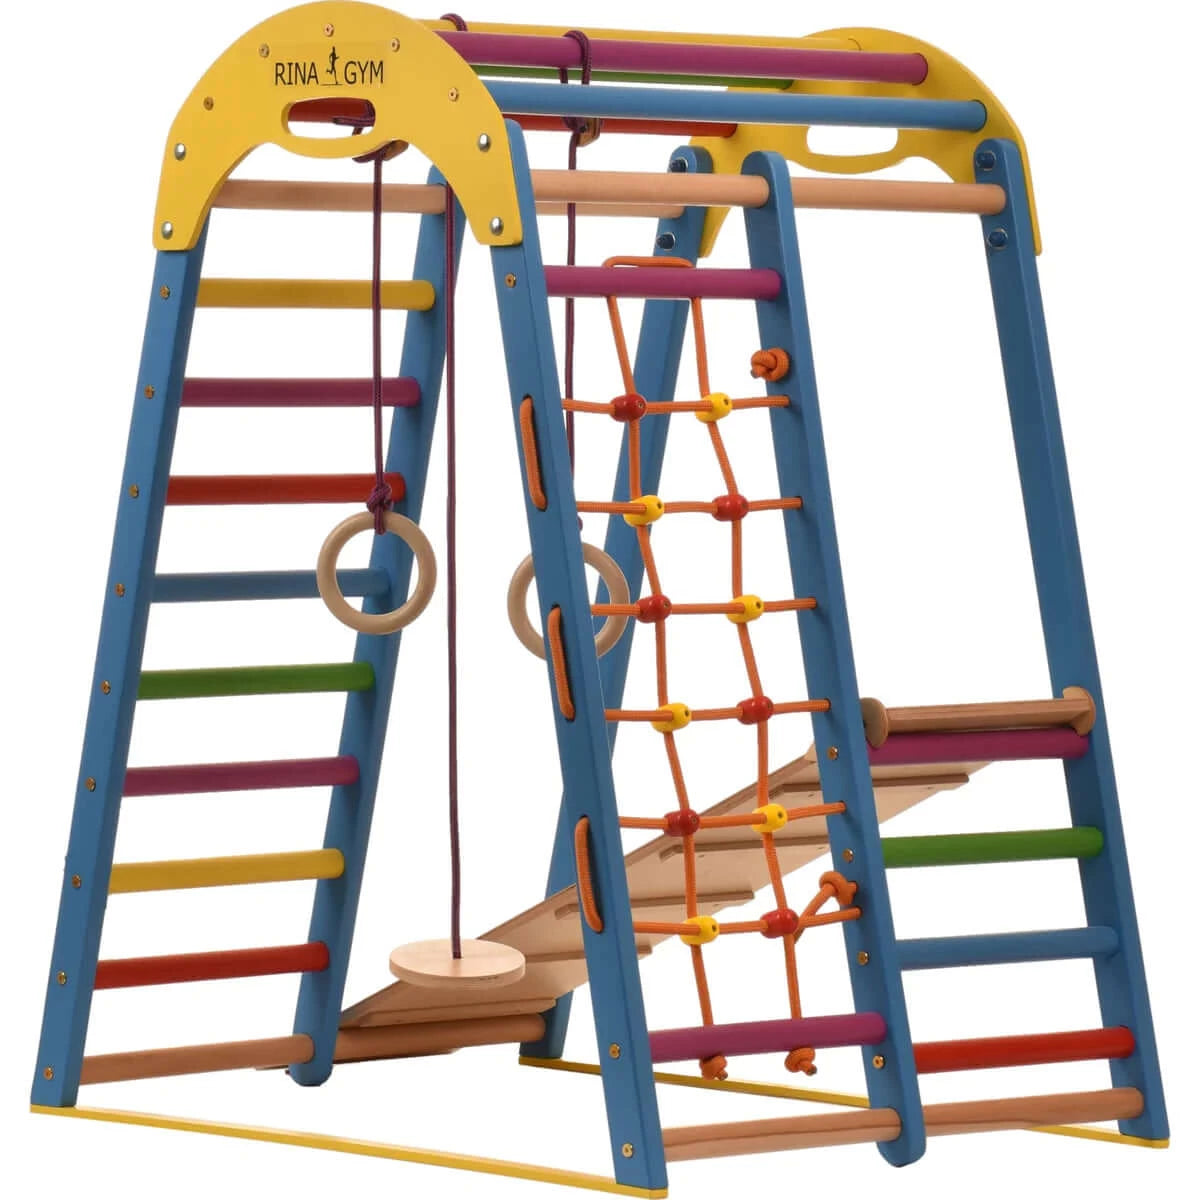 Indoor blue playground made of wood with climbing net, swedish ladder, rings, slide